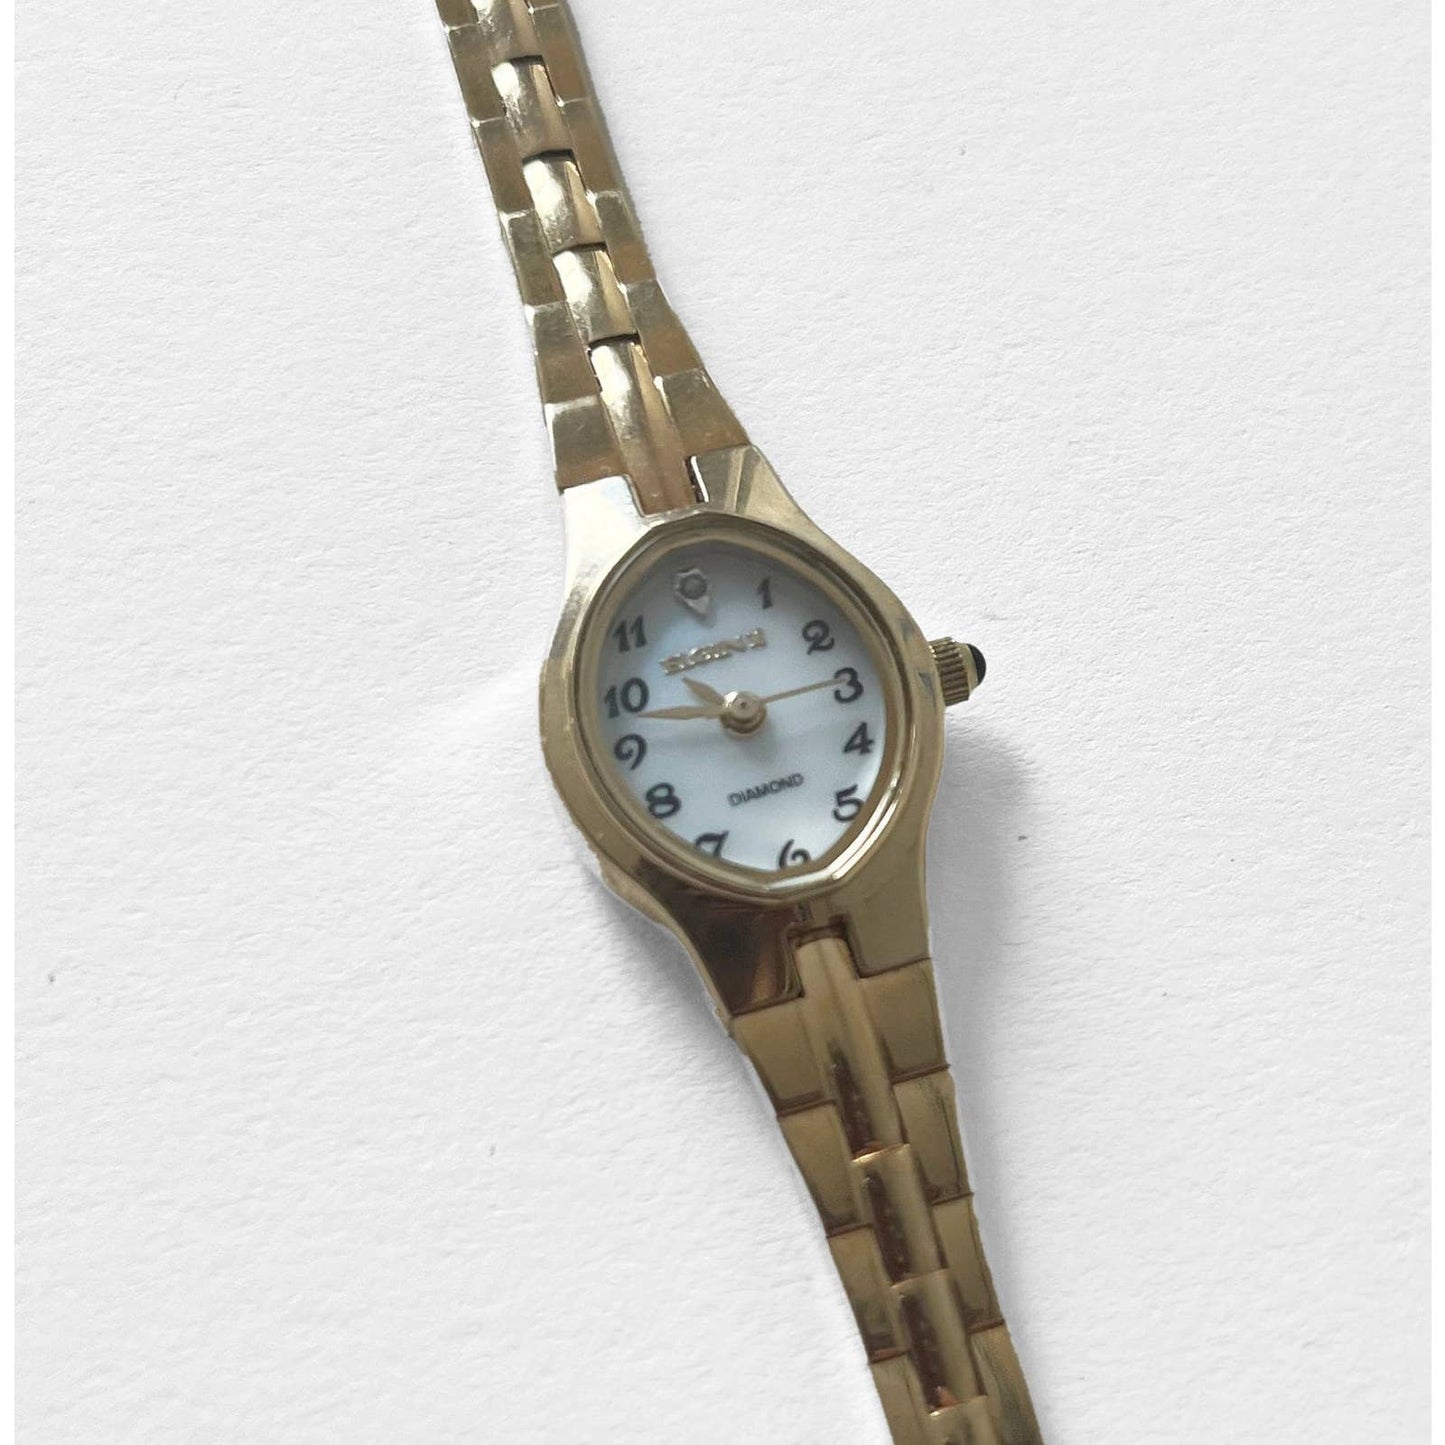 Vintage Gold Watch with Pearl Face